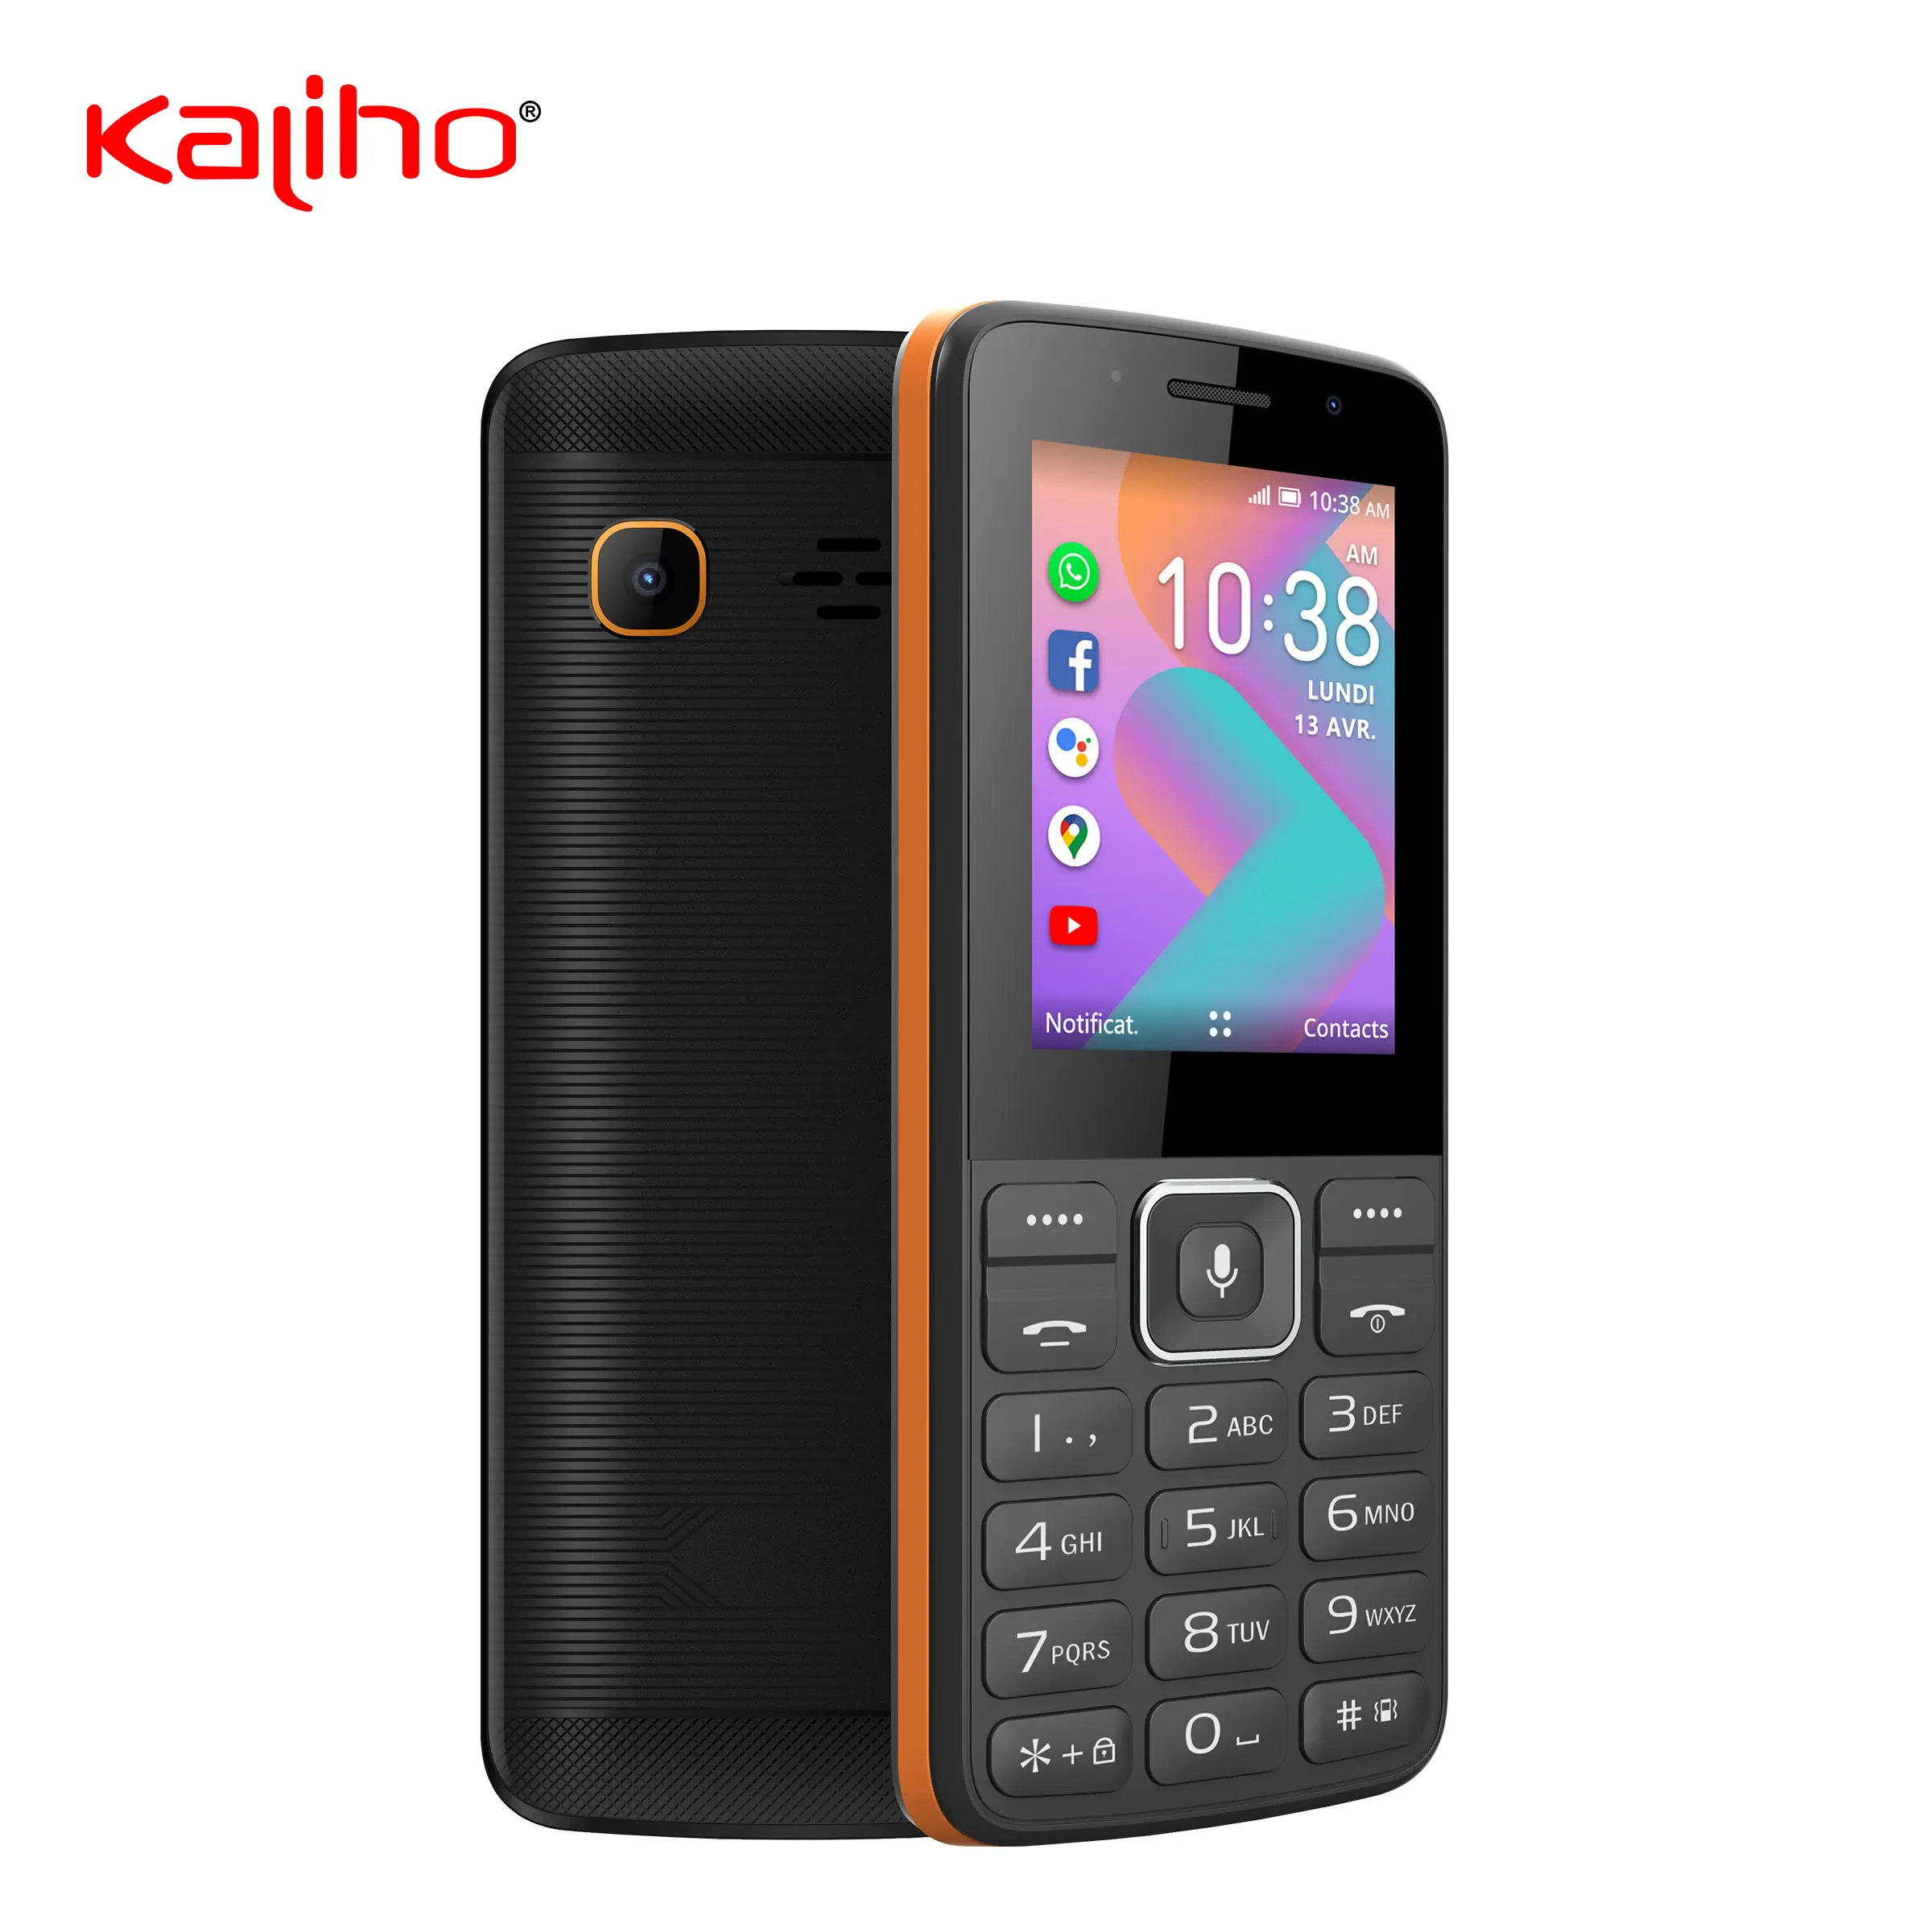 4g keypad mobile latest design kaios cell phone with GPS